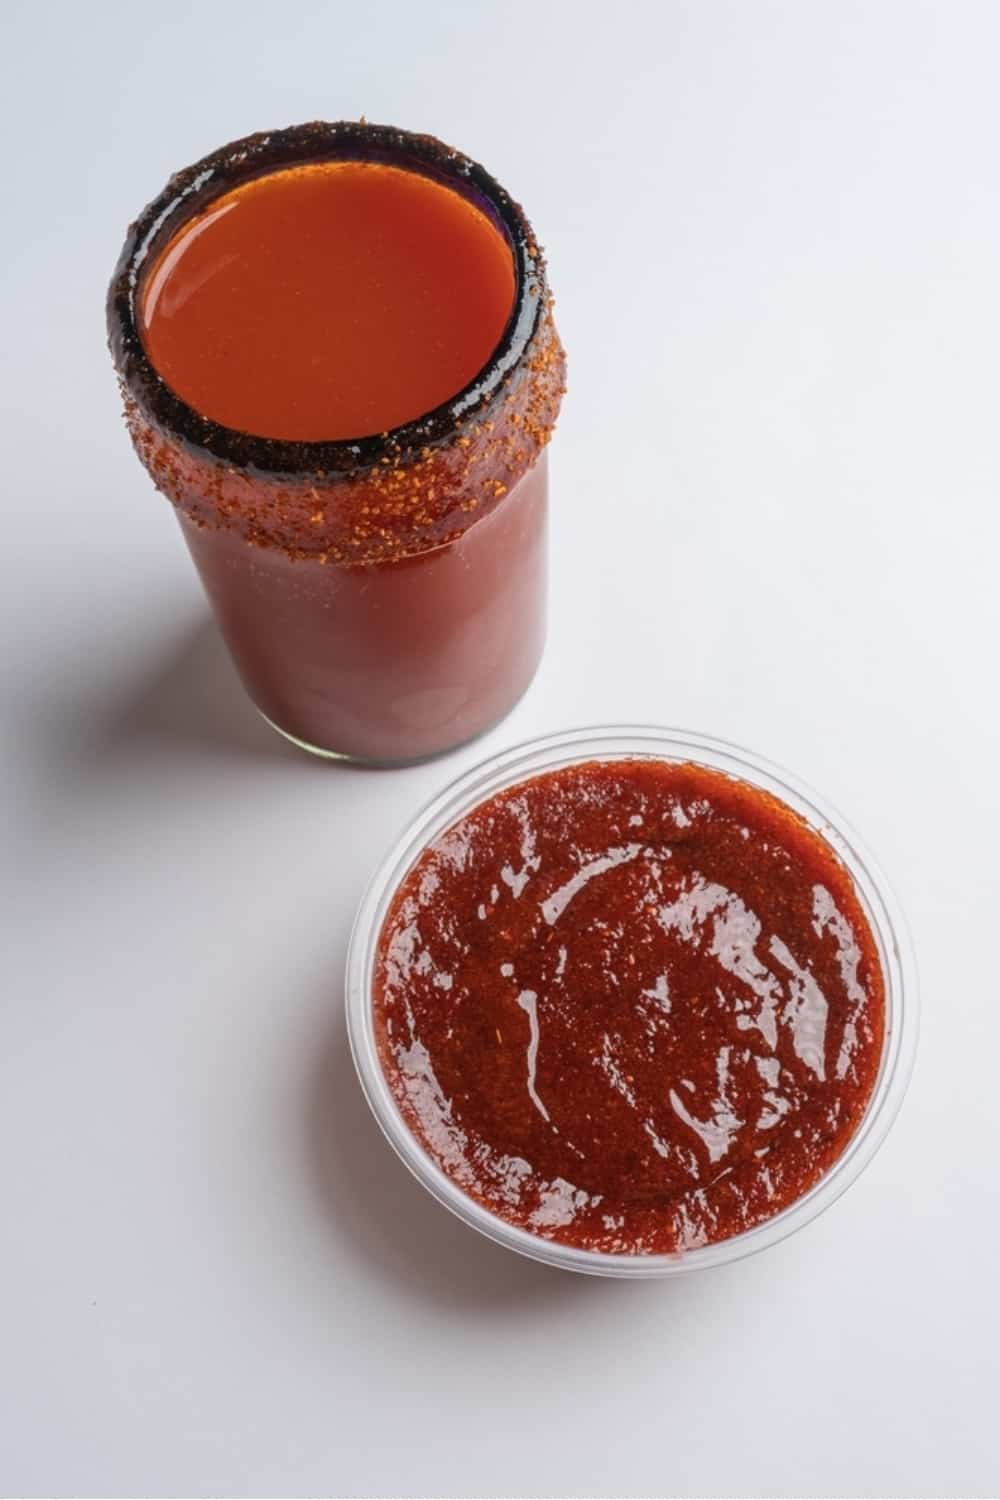 chamoy sauce in a cup and a jar